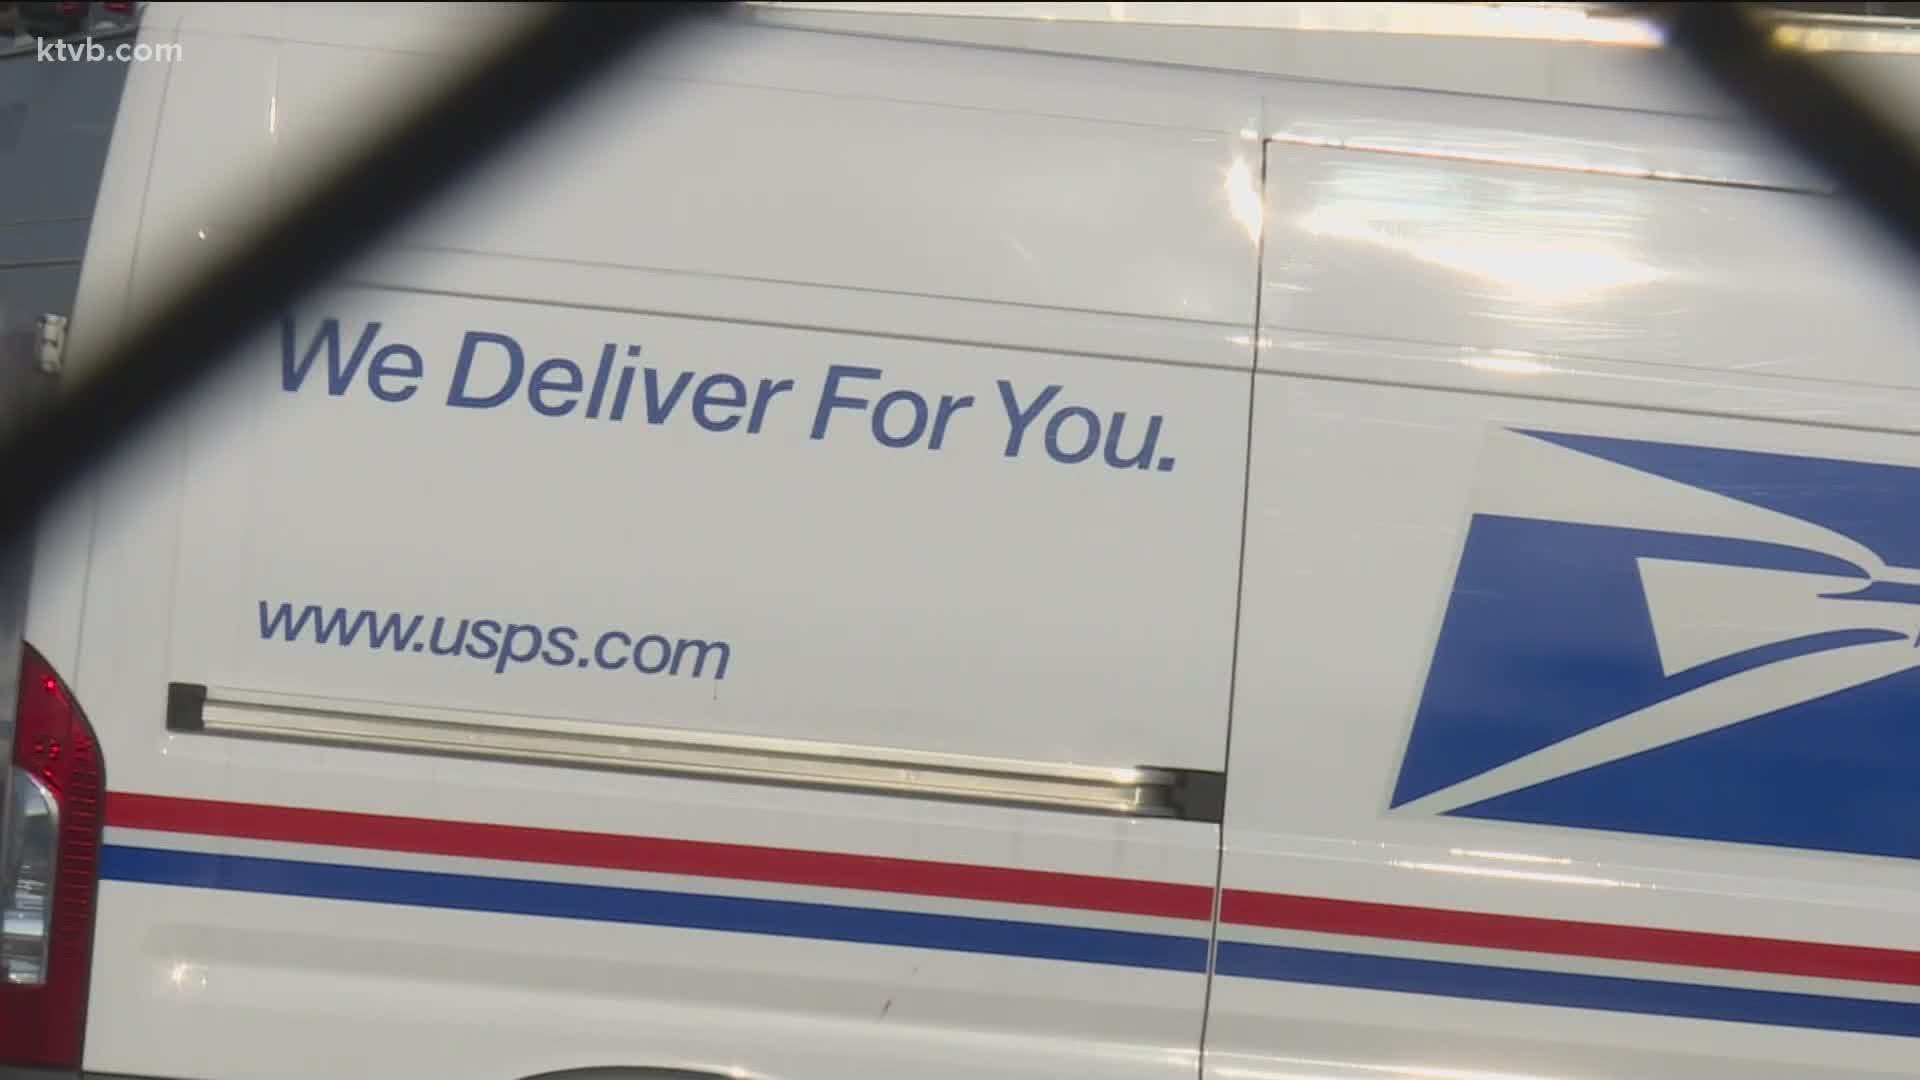 With Christmas just a few days away, is there still time to send packages or mail?